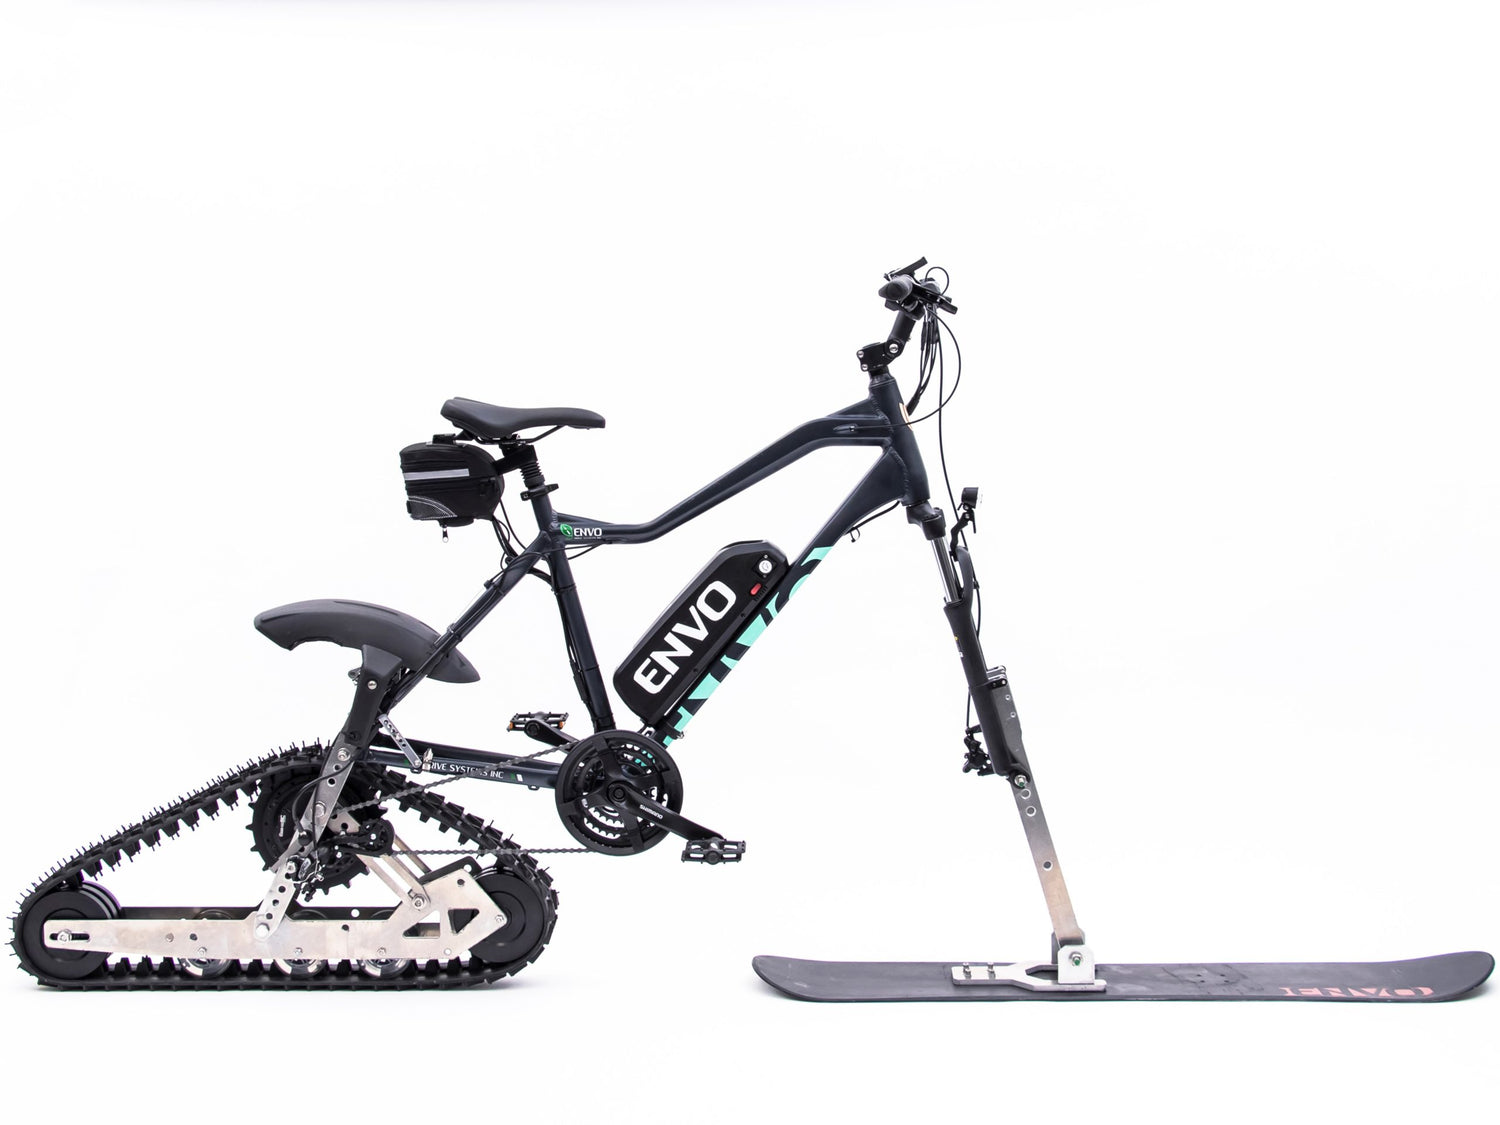 ENVO SET TO LAUNCH LOW COST SNOW BIKE TO MARKET